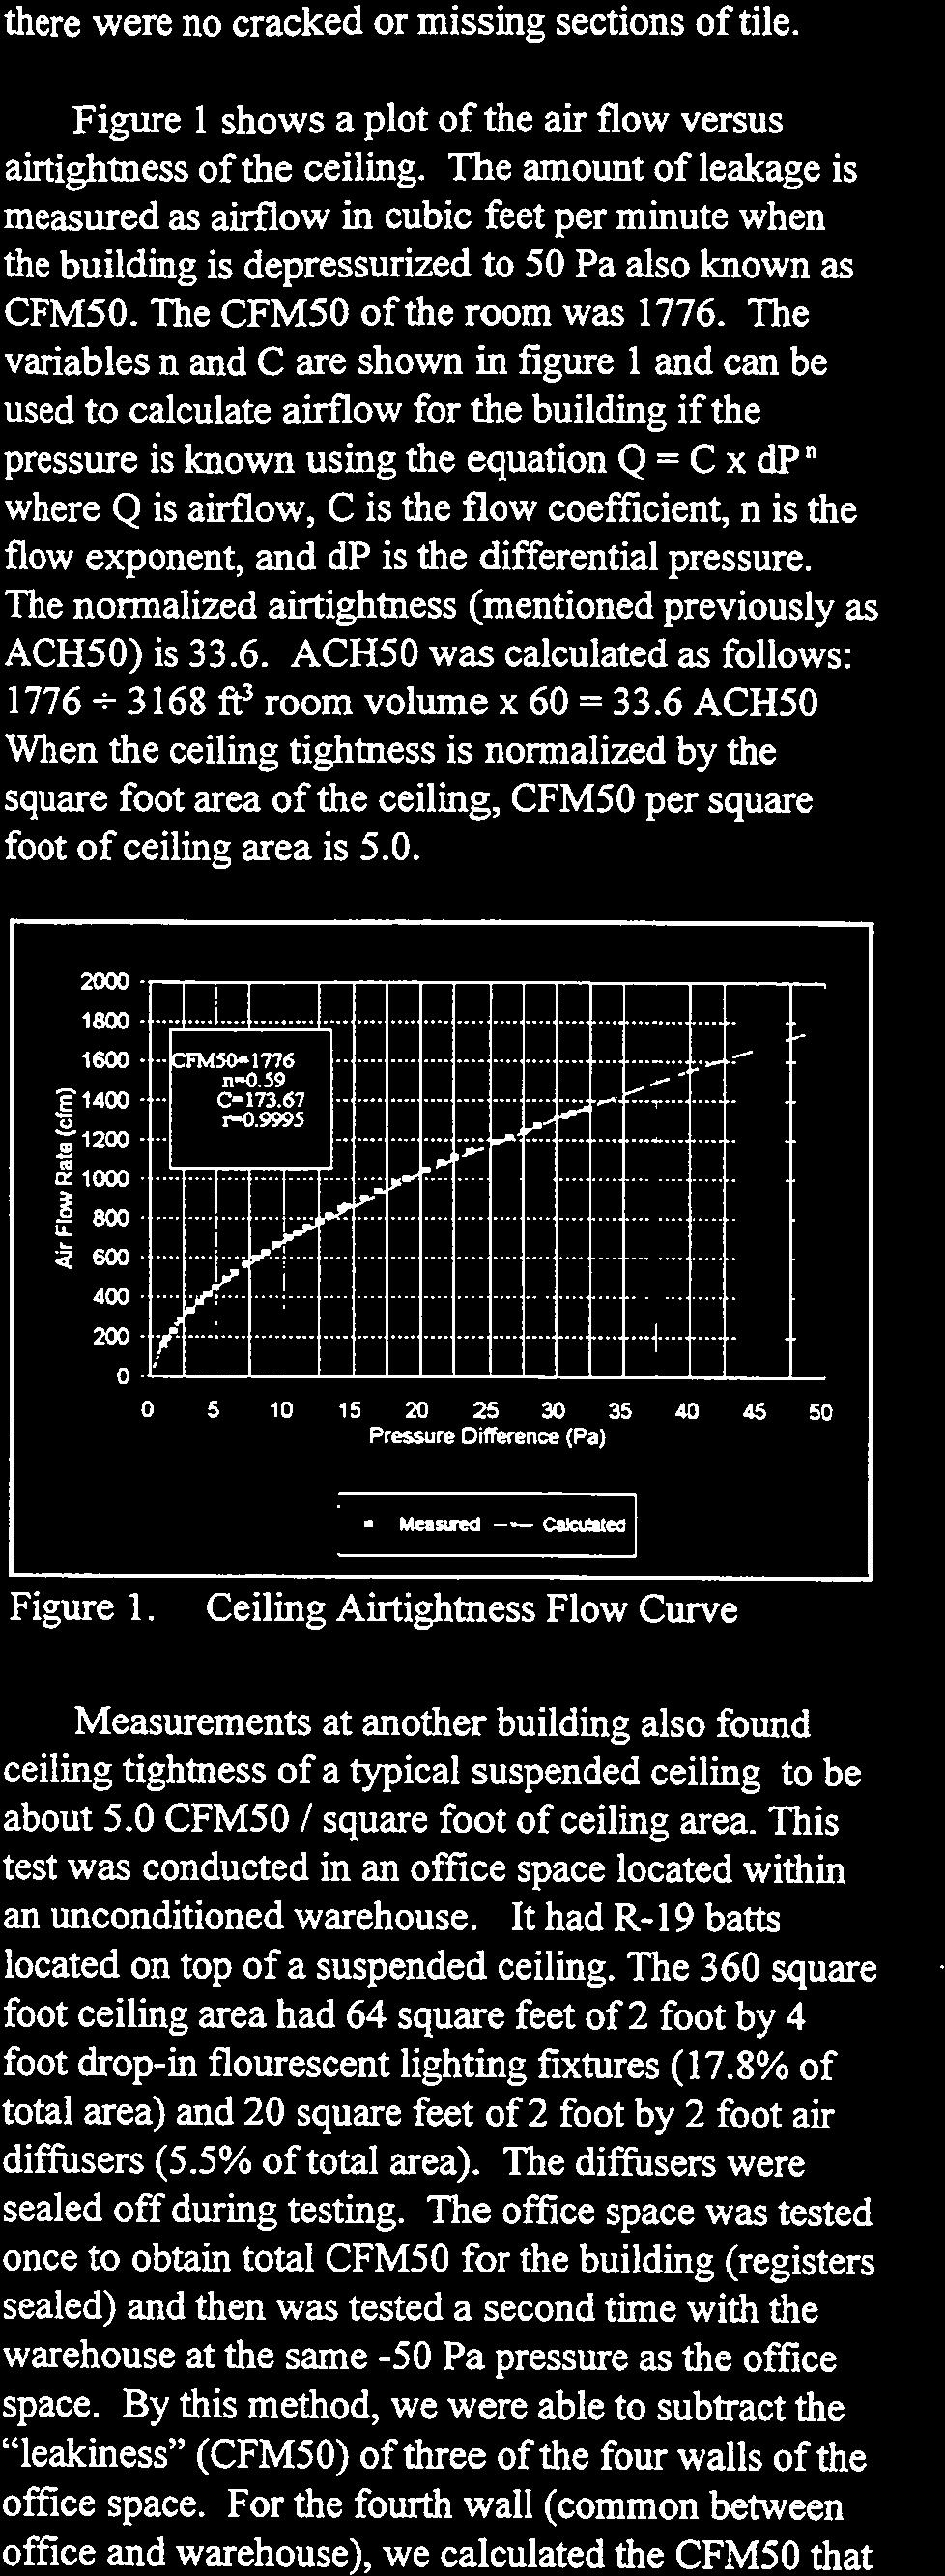 The variables n and C are shown in figure 1 and can be used to calculate airflow for the building if the pressure is known using the equation Q = C x dpn where Q is airflow, C is the flow